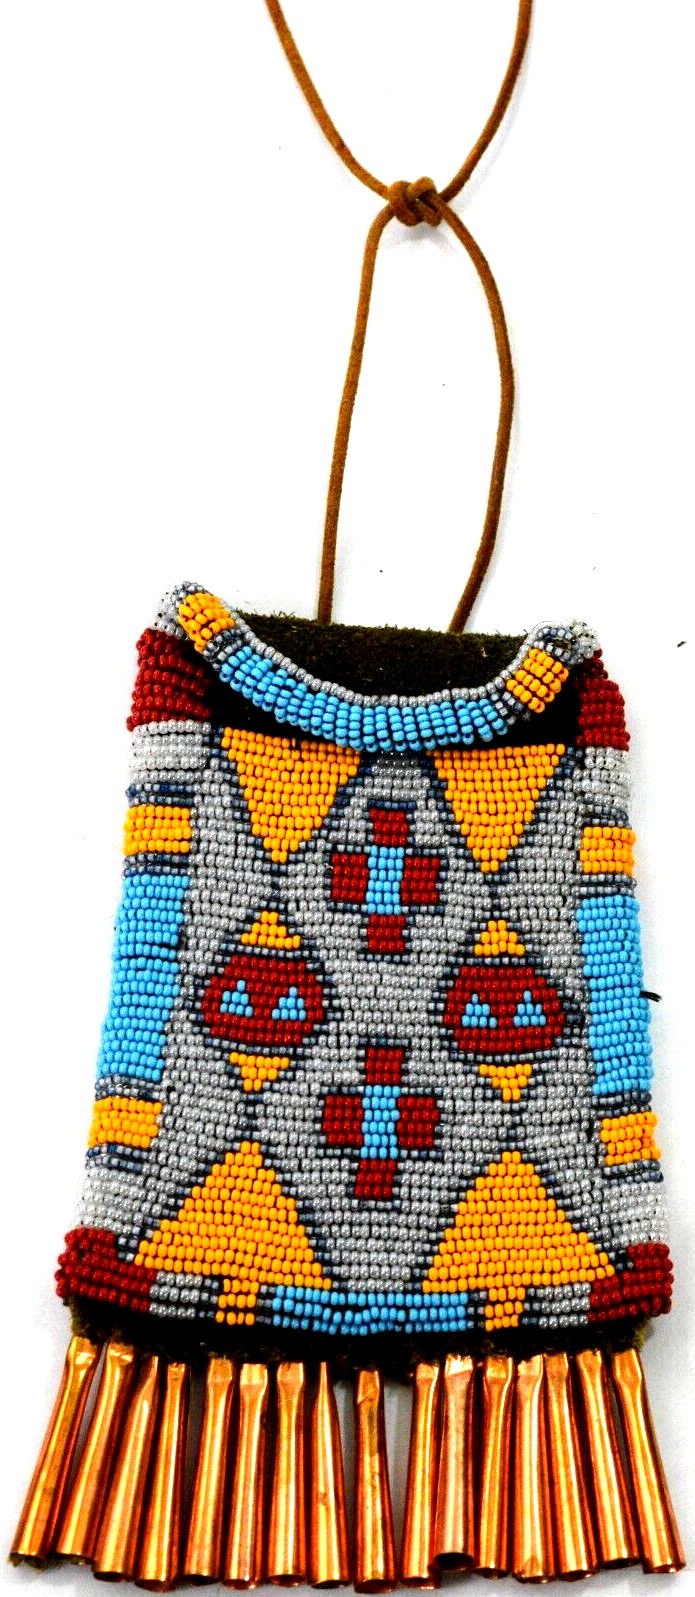 Beautiful Sioux Beaded Strike-A-Lite Bag with Copper Tassel\'s by Mike Morris